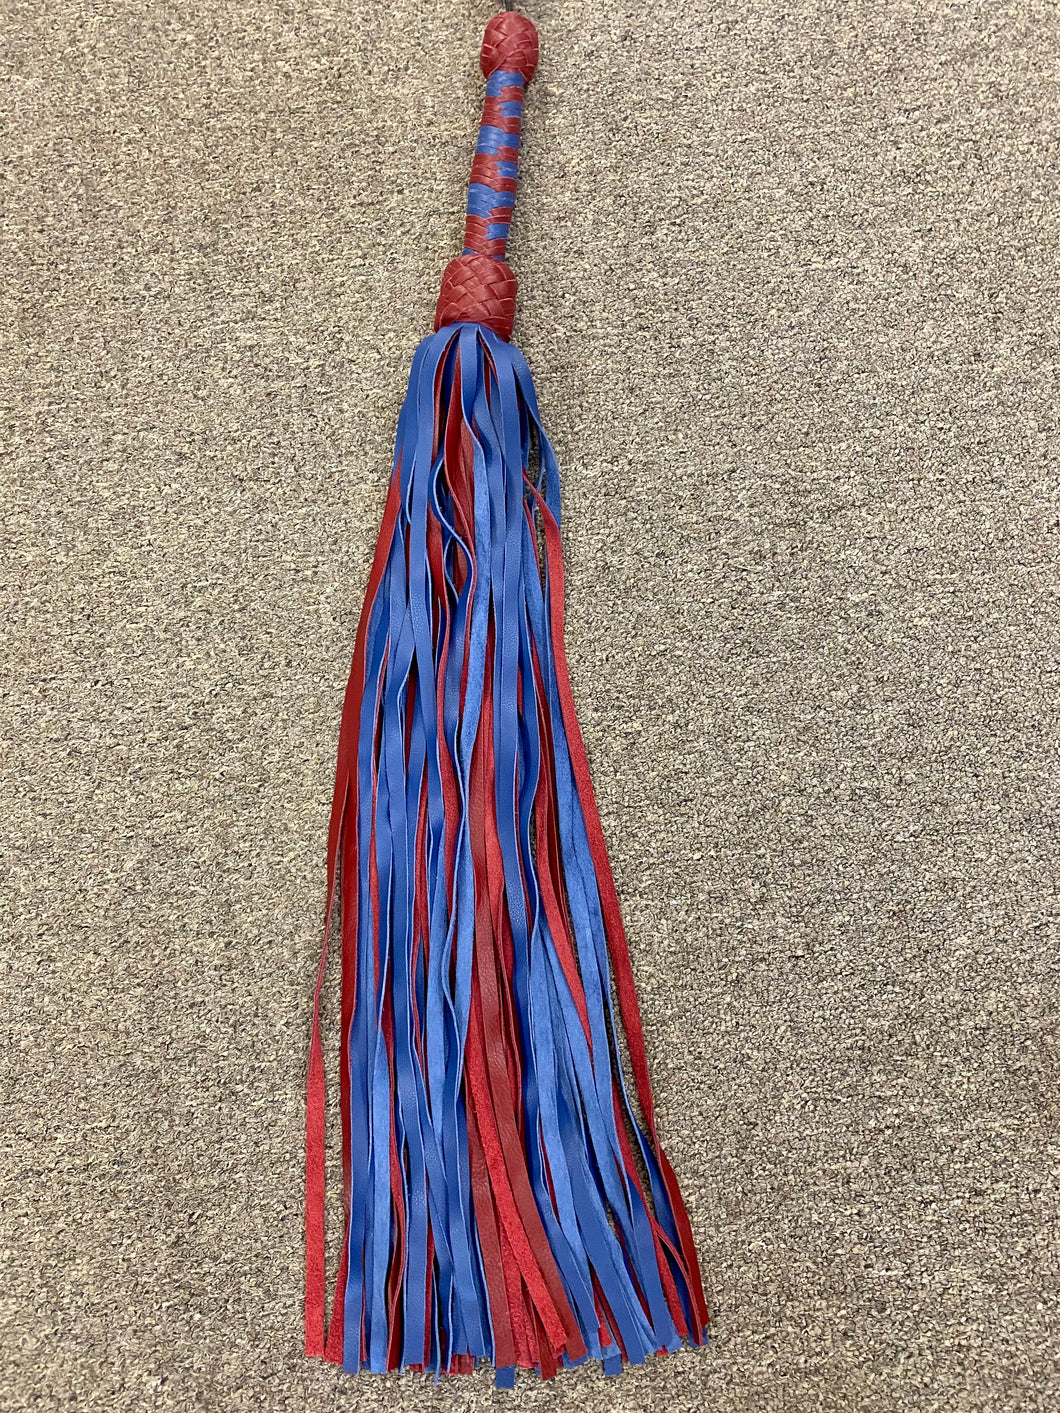 BLUE AND BURGUNDY FLOGGER BY DAN HOUCHINS